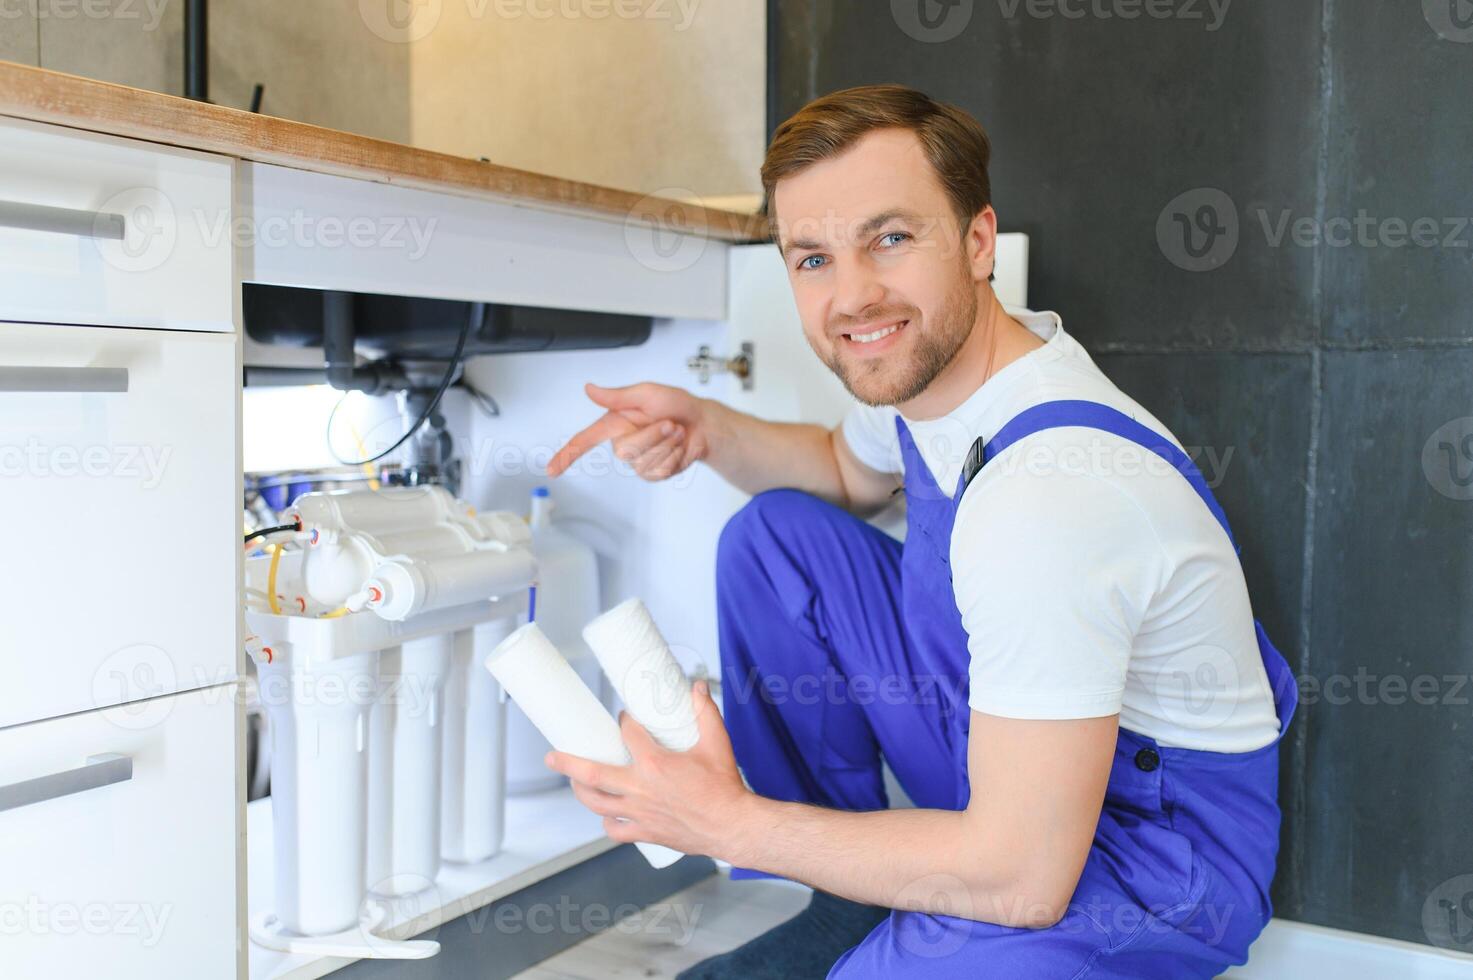 Plumber installs or change water filter. Replacement aqua filter. Repairman installing water filter cartridges in a kitchen. Installation of reverse osmosis water purification system. photo